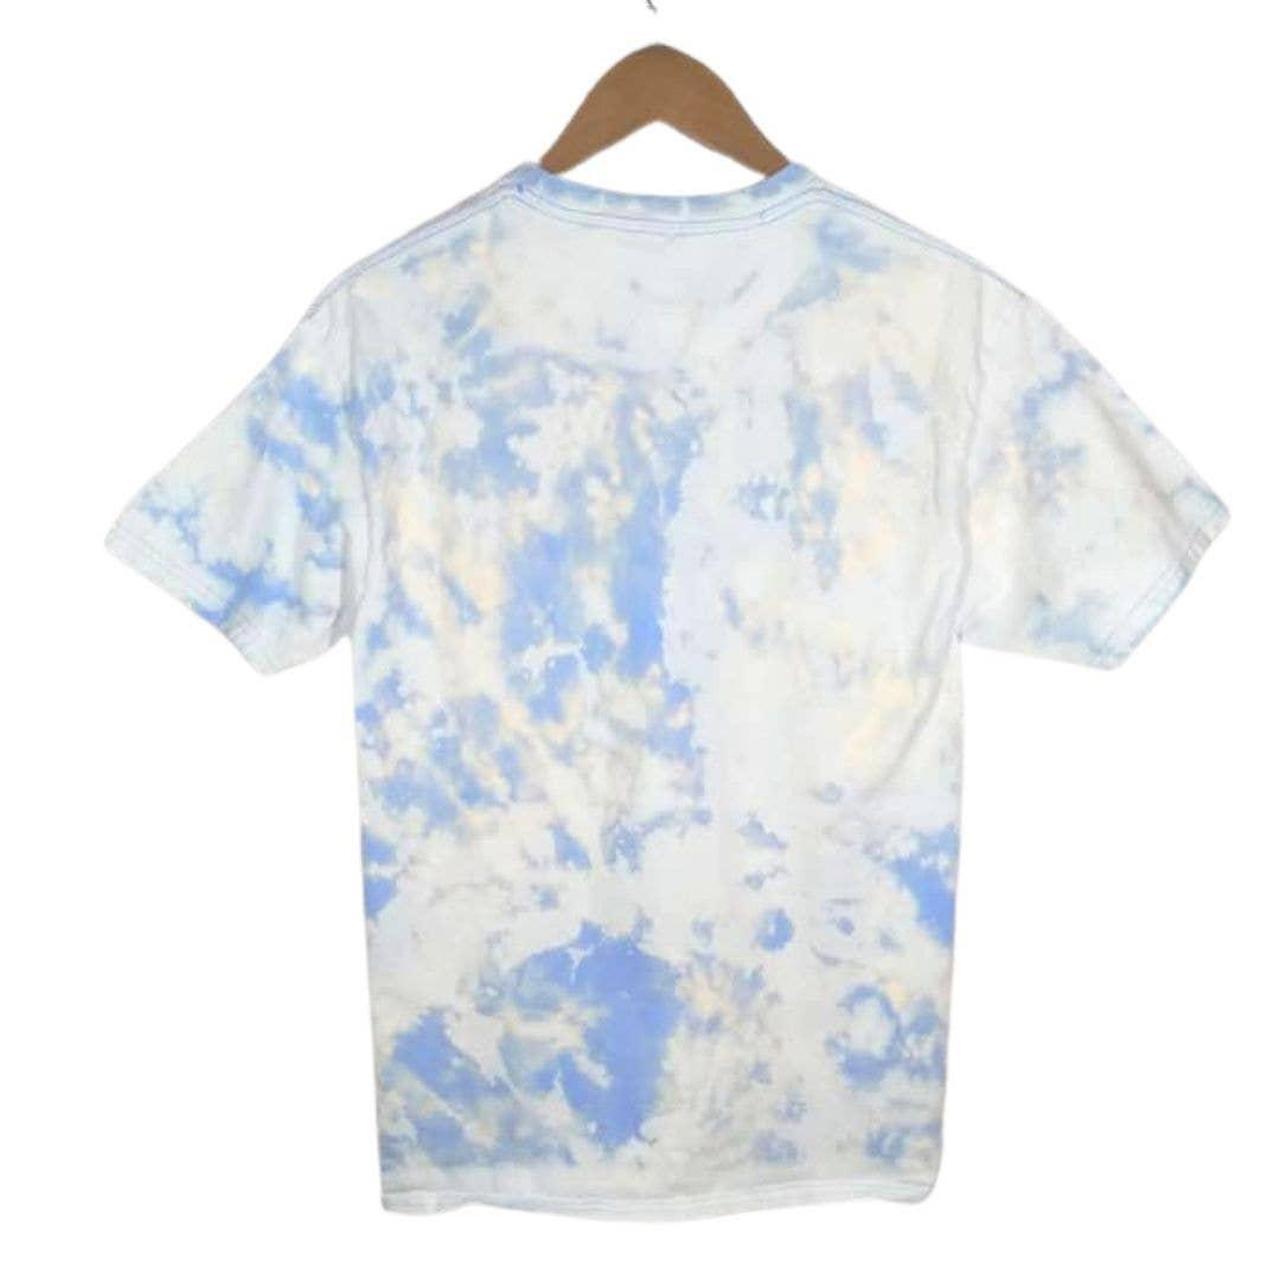 Our Legacy Men's Blue and White T-shirt (2)